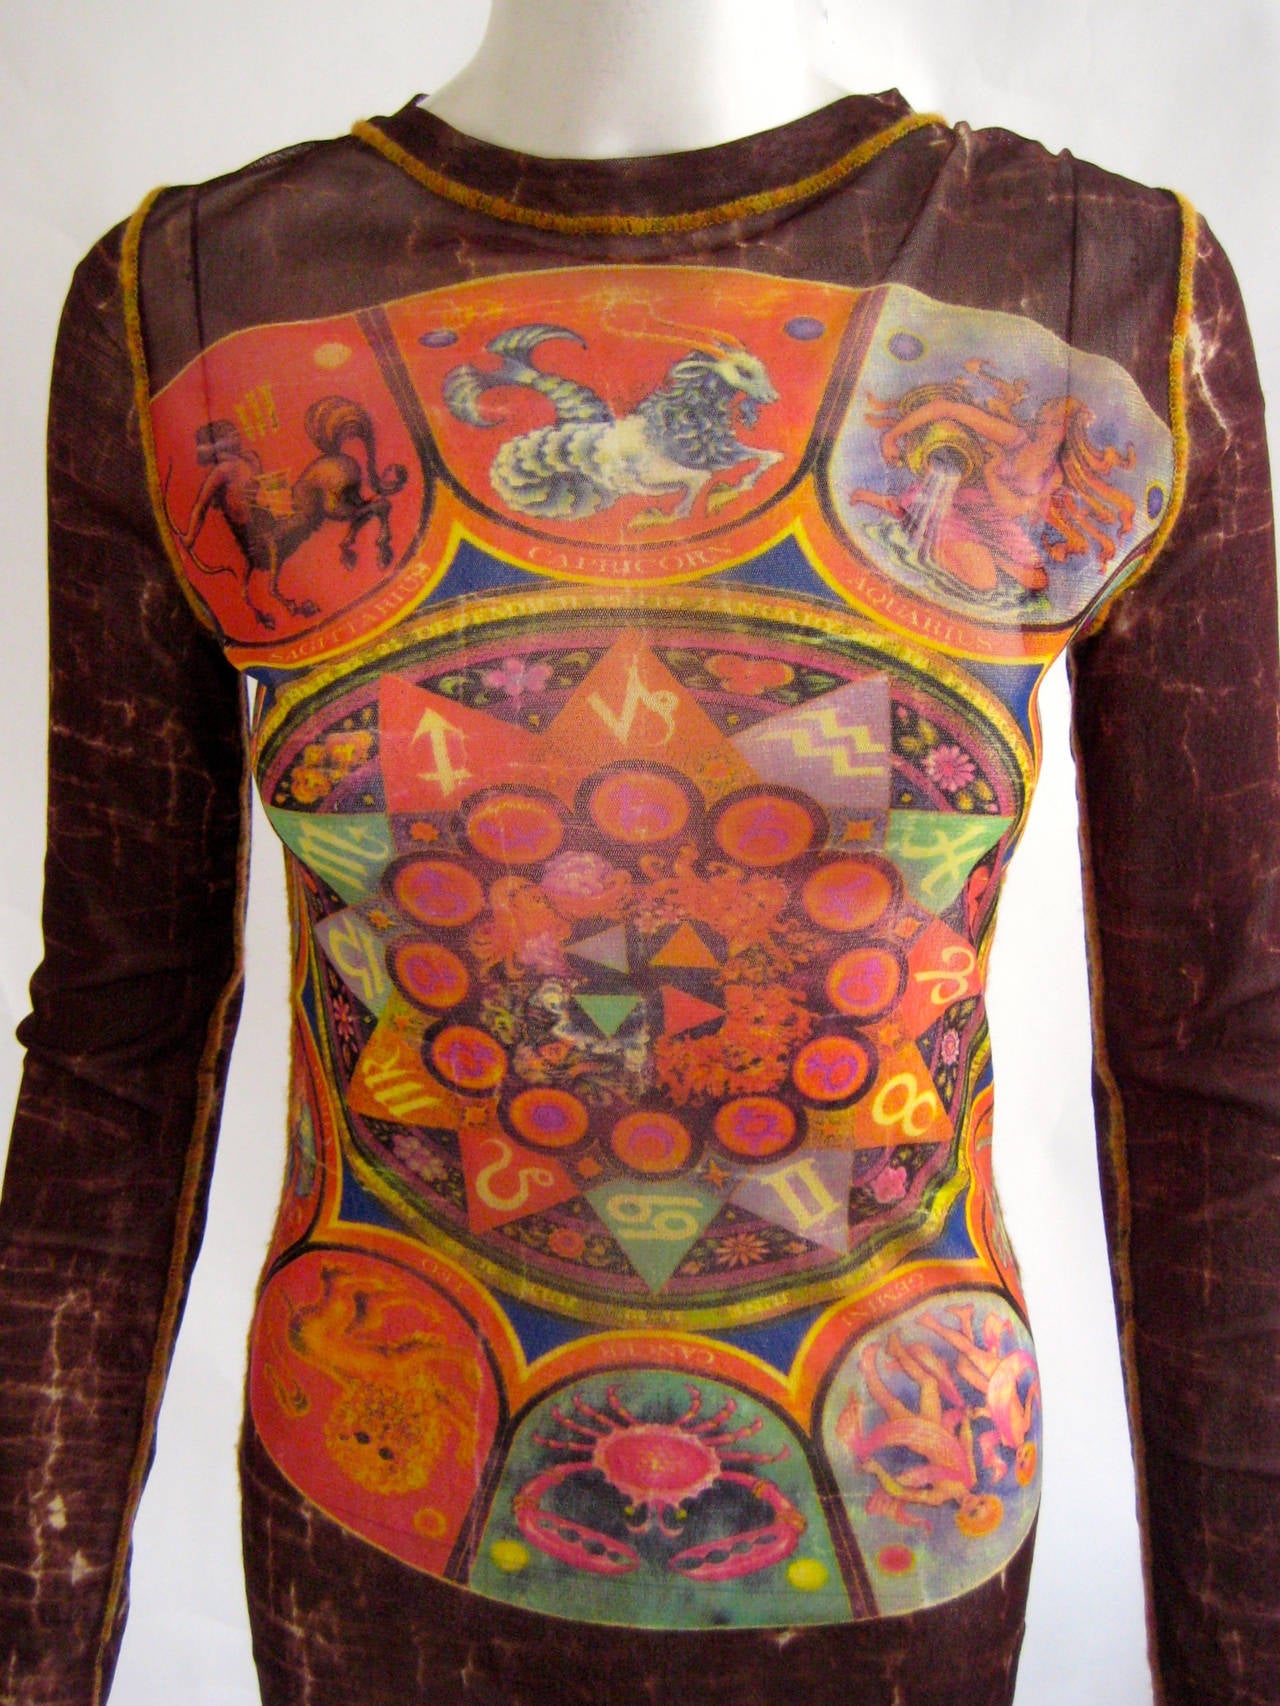 Vintage Gaultier mesh top printed with signs of the zodiac.Labeled size large but shown on a size 6 mannequin .Excellent condition